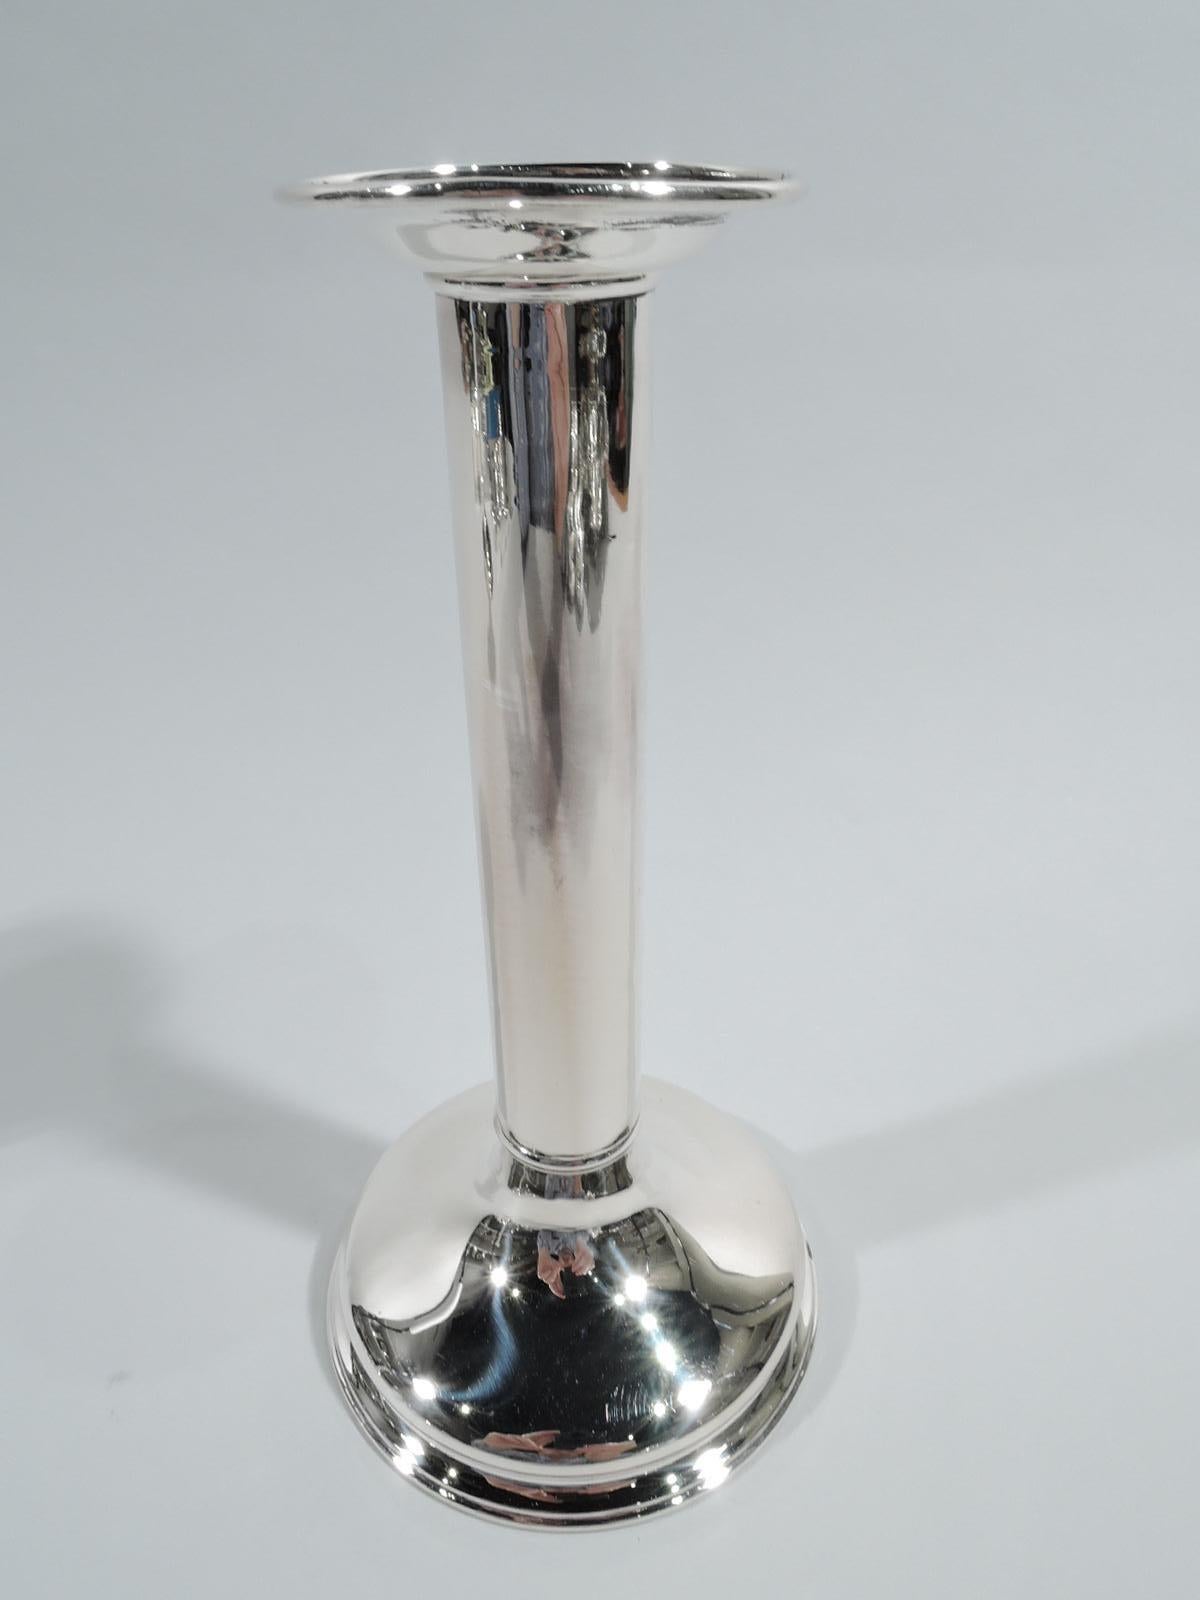 Pair of Edwardian modern classical sterling silver candlesticks. Made by Tiffany & Co. in New York: Each: Socket with curved and tapering rim set in column with understated base knop on raised foot with spread rim. Fully marked including pattern no.